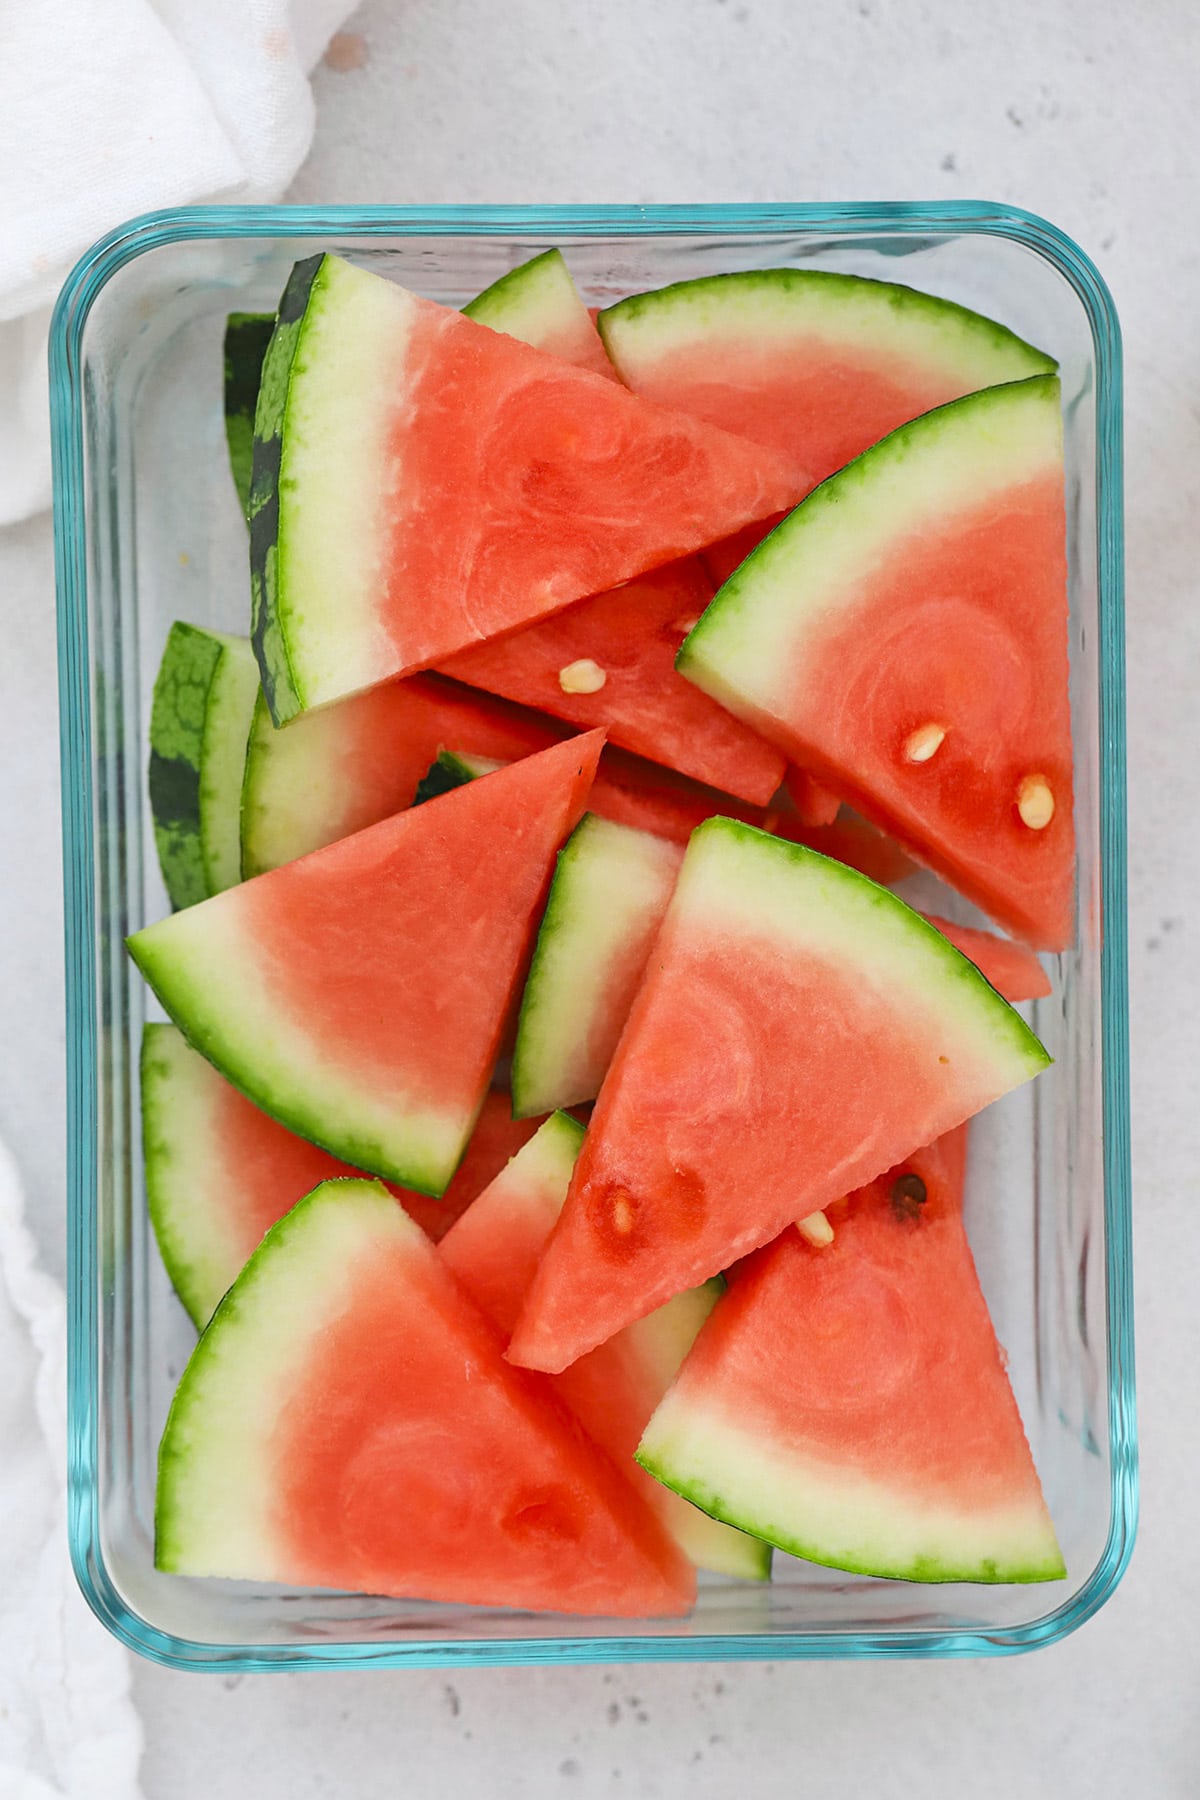 Overhead view of sliced watermelon wedges in a glass container